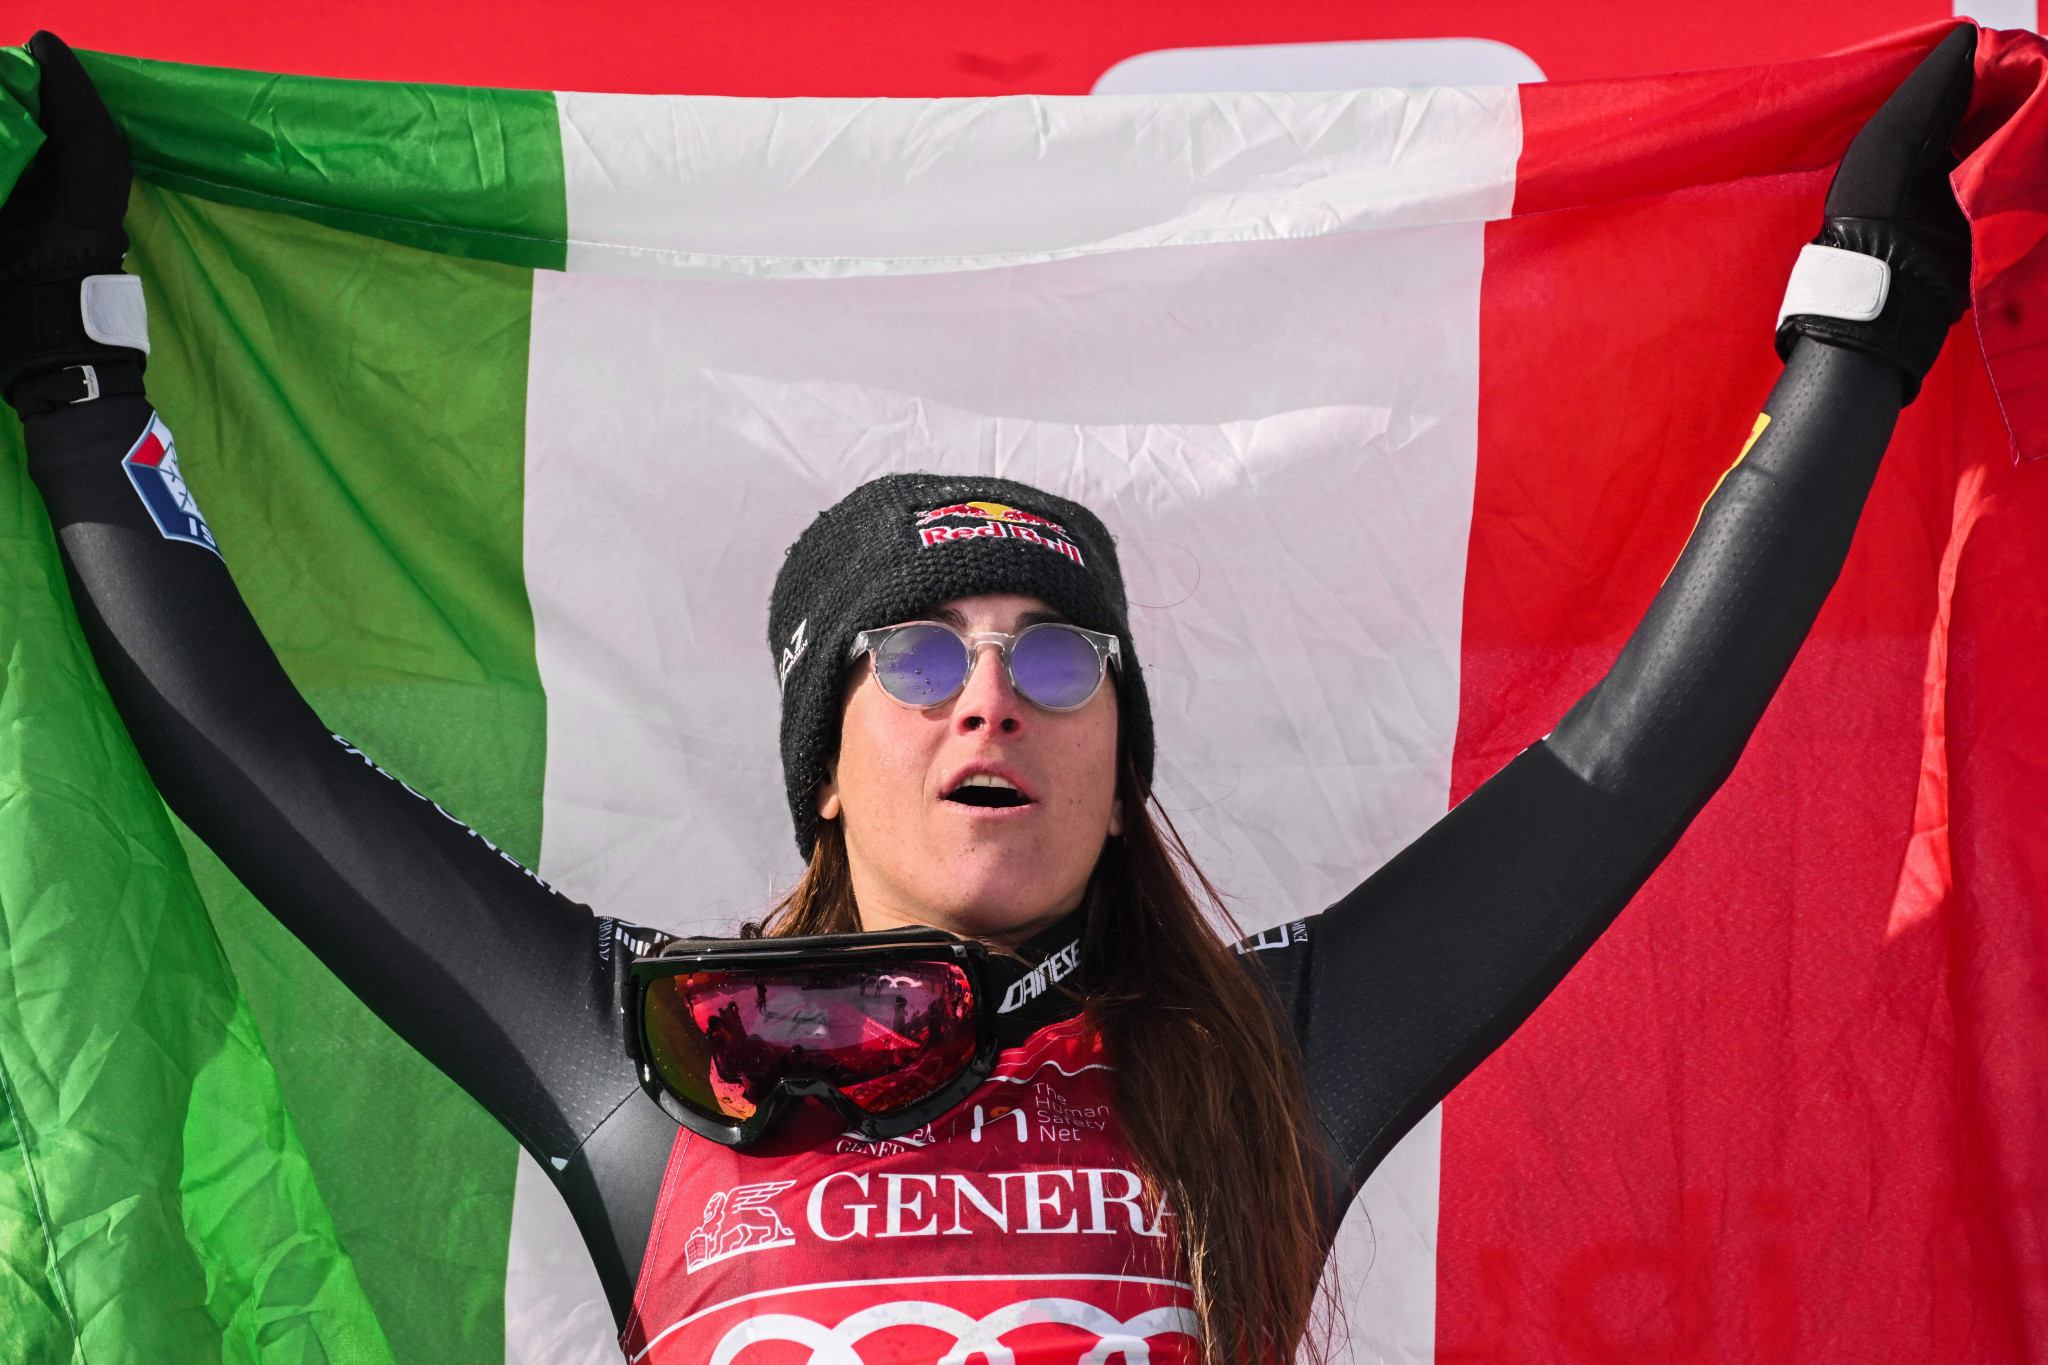 Sofia Goggia of Italy claimed a fourth downhill victory from five races this season in Cortina d'Ampezzo ©Getty Images